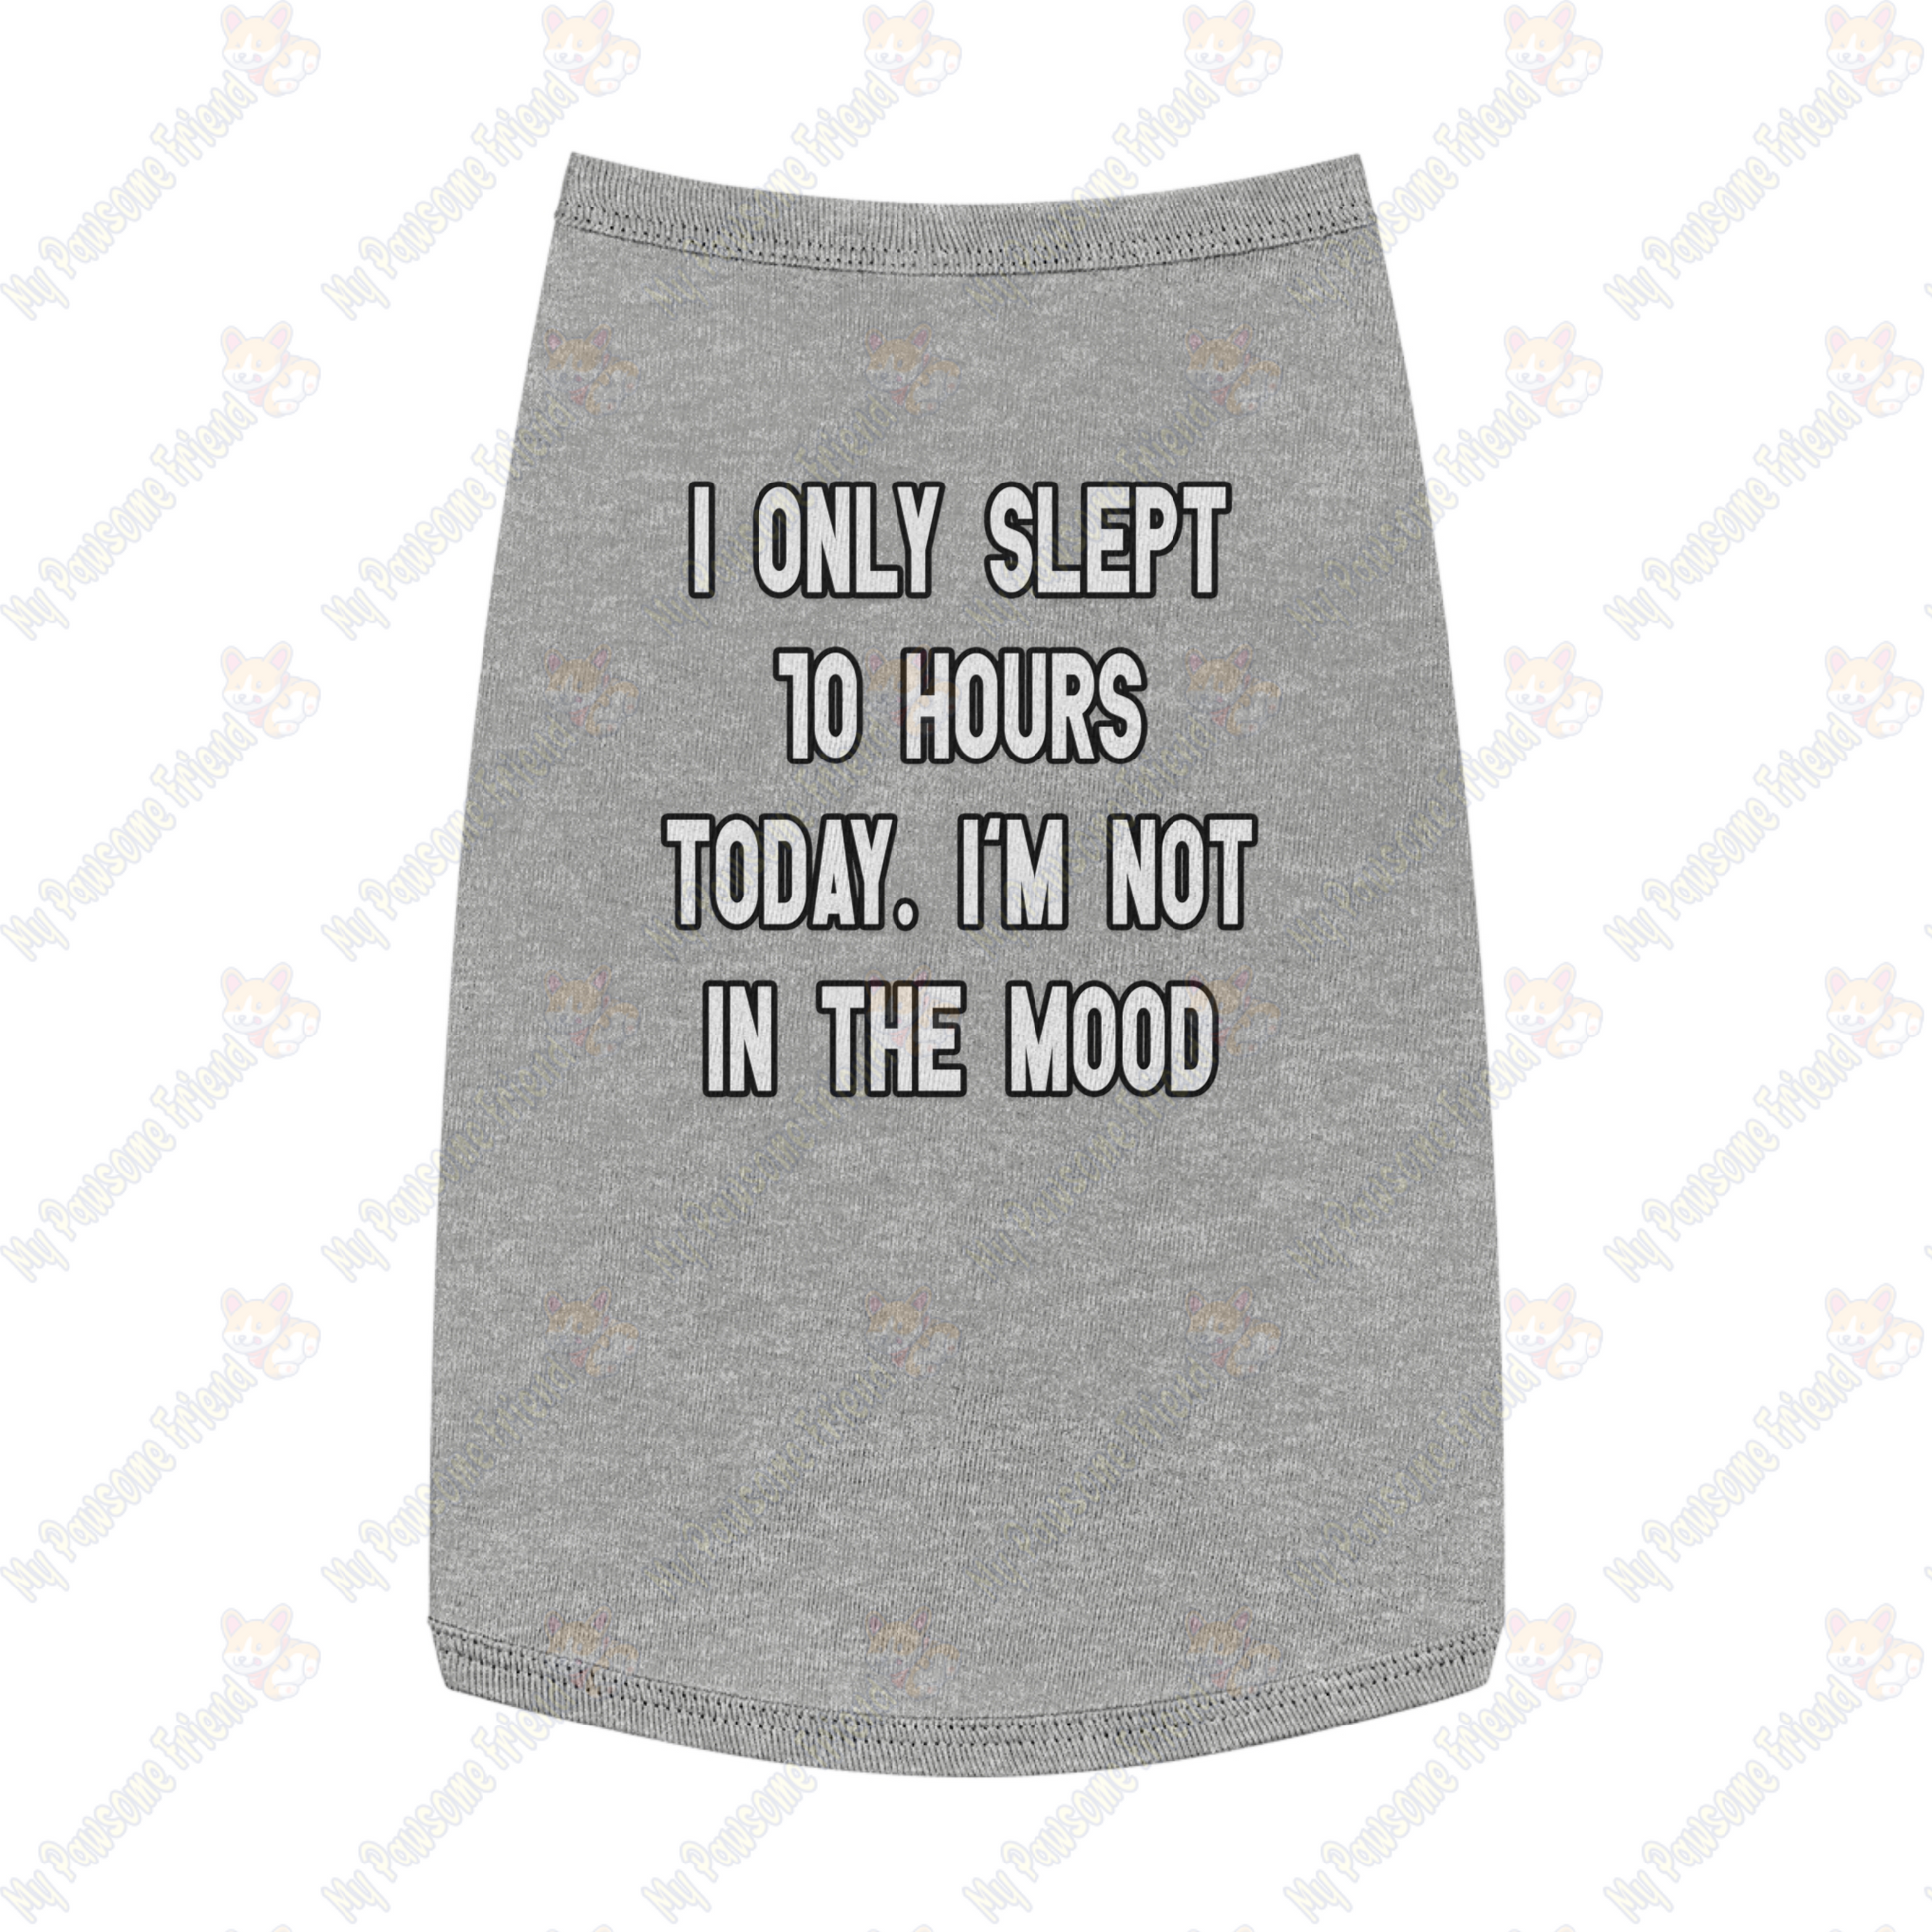 I ONLY SLEPT 10 HOURS TODAY. I'M NOT IN THE MOOD Pet Tank Top grey